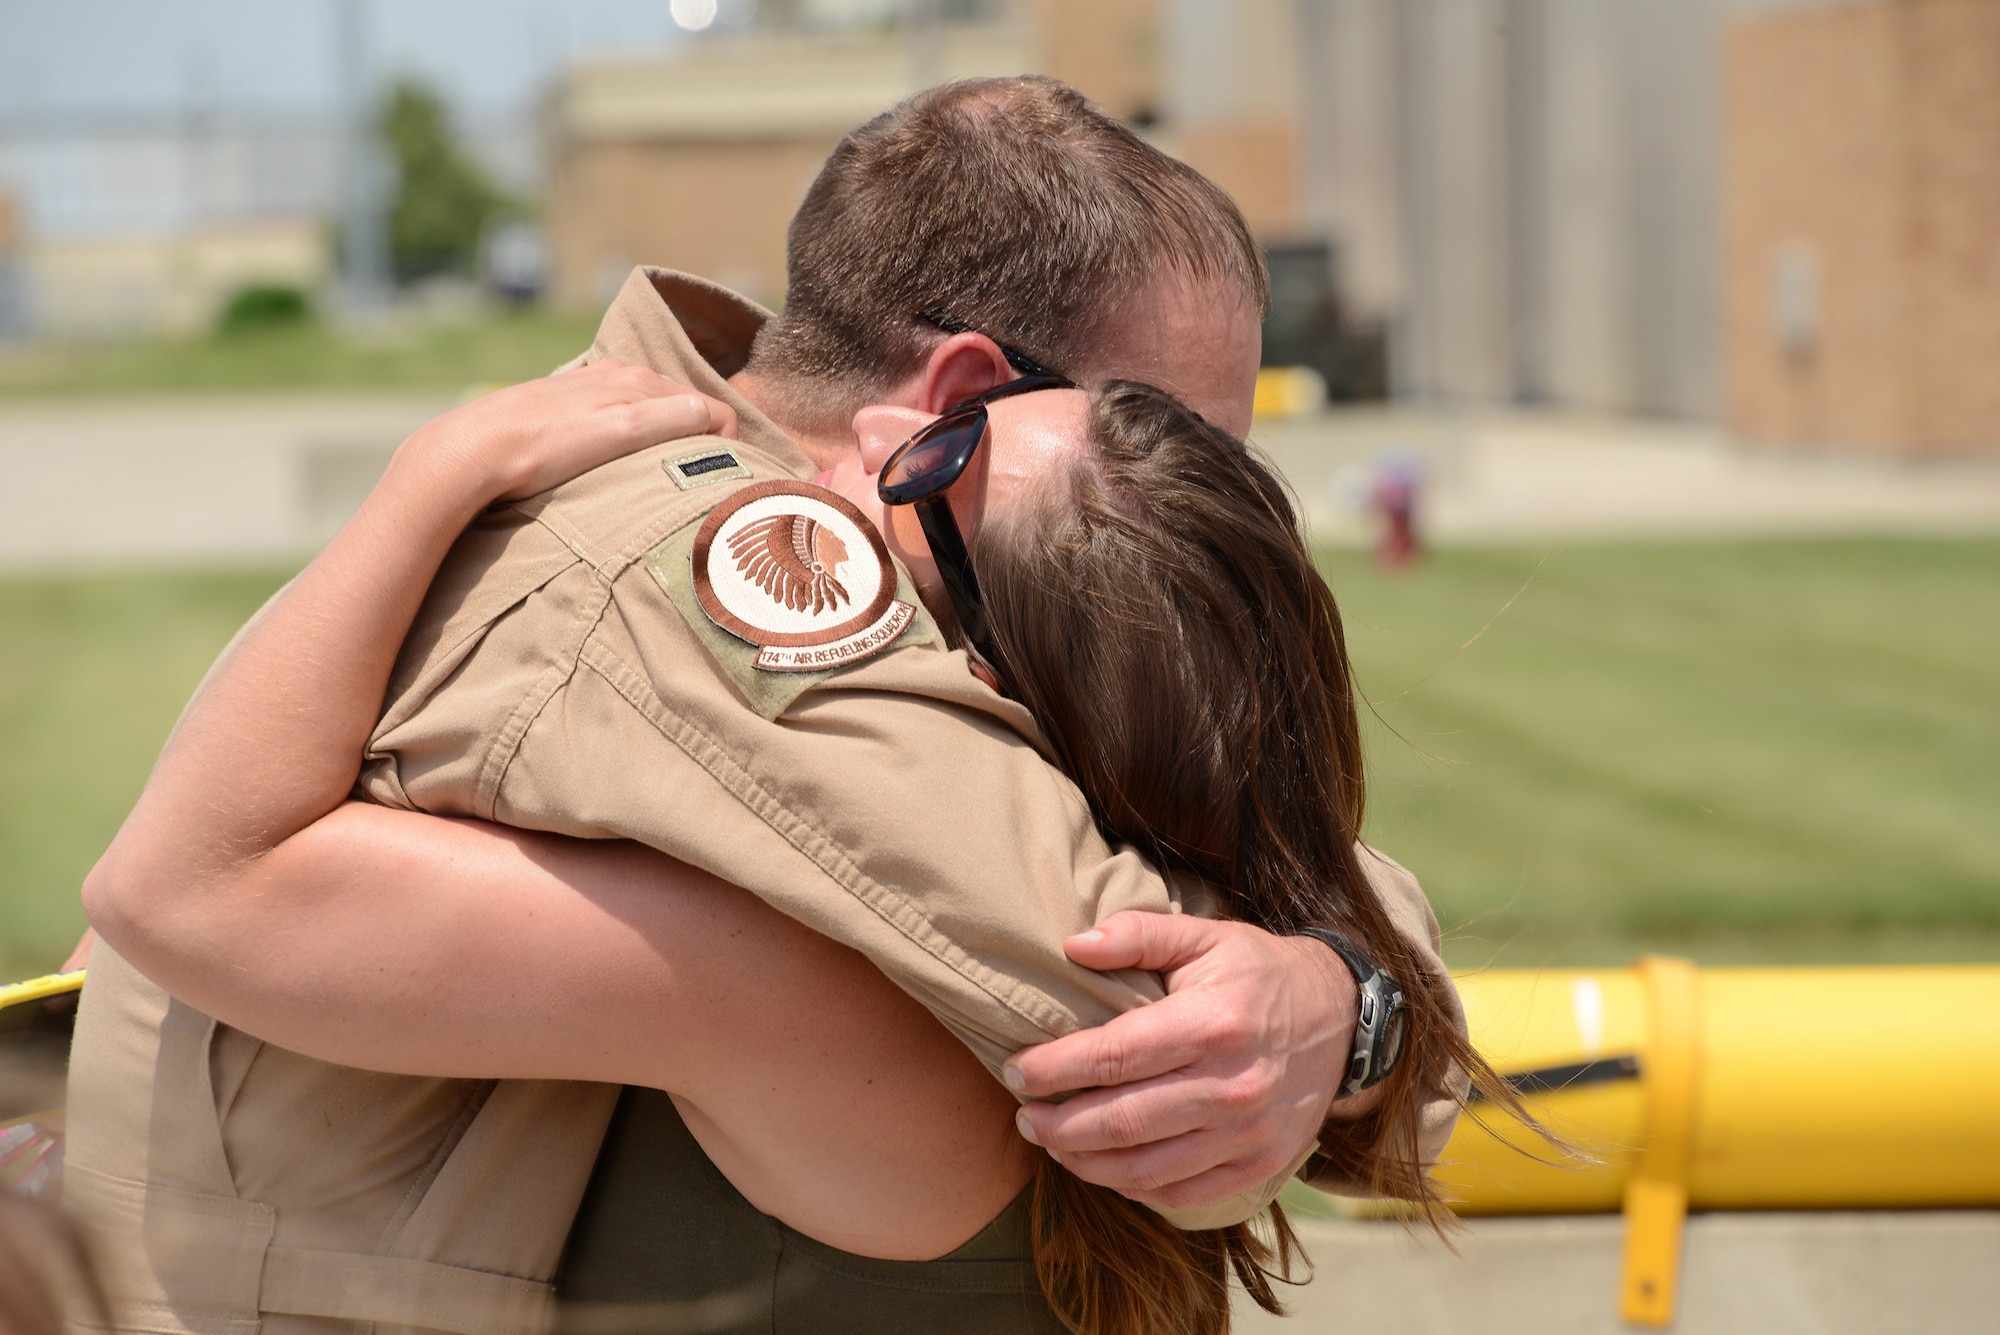 With temperatures in the upper 90’s 1st Lt. Kelly Brower a KC-135 pilot with the 185th Air Refueling Wing holds his wife in a very warm embrace at the Sioux City, Iowa Air National Guard base on June 11, 2016 after returning from Al Udeid Air Base, Qatar. 185th ARW unit members and aircraft were temporarily assigned to the 340th Expeditionary Air Refueling Squadron at Al Udeid since February, where they were providing midair refueling support for U.S. and partner nation aircraft in direct support of Operation Inherent Resolve.
(U.S. Air Guard Photo by: Master Sgt. Vincent De Groot/released)